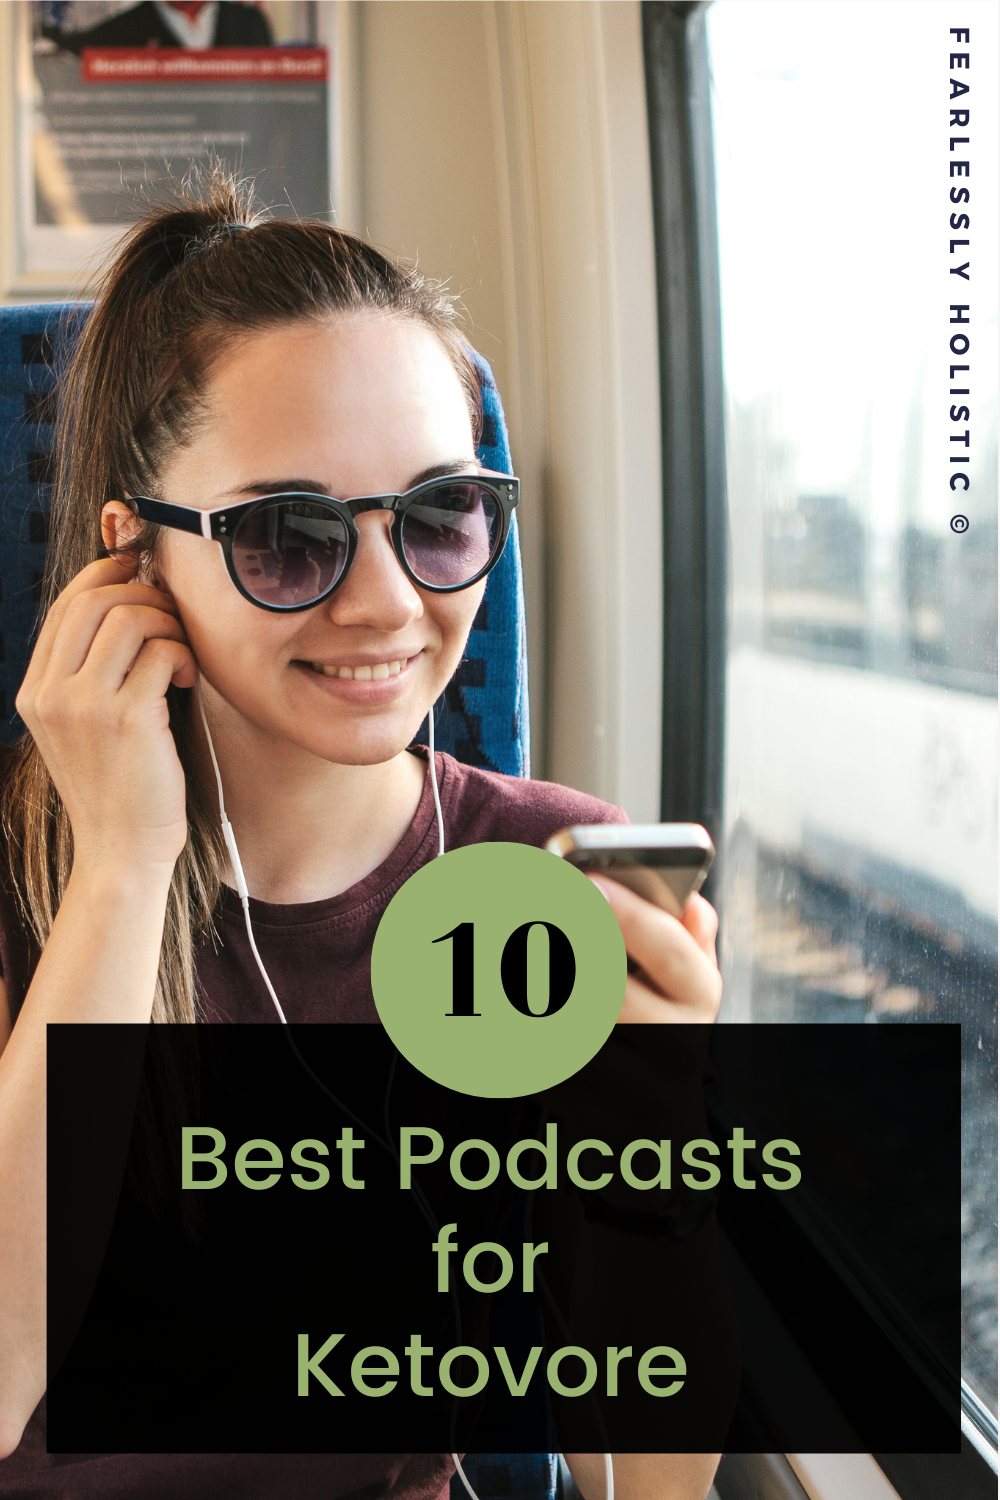 Top Ten Best Podcasts for Ketovore